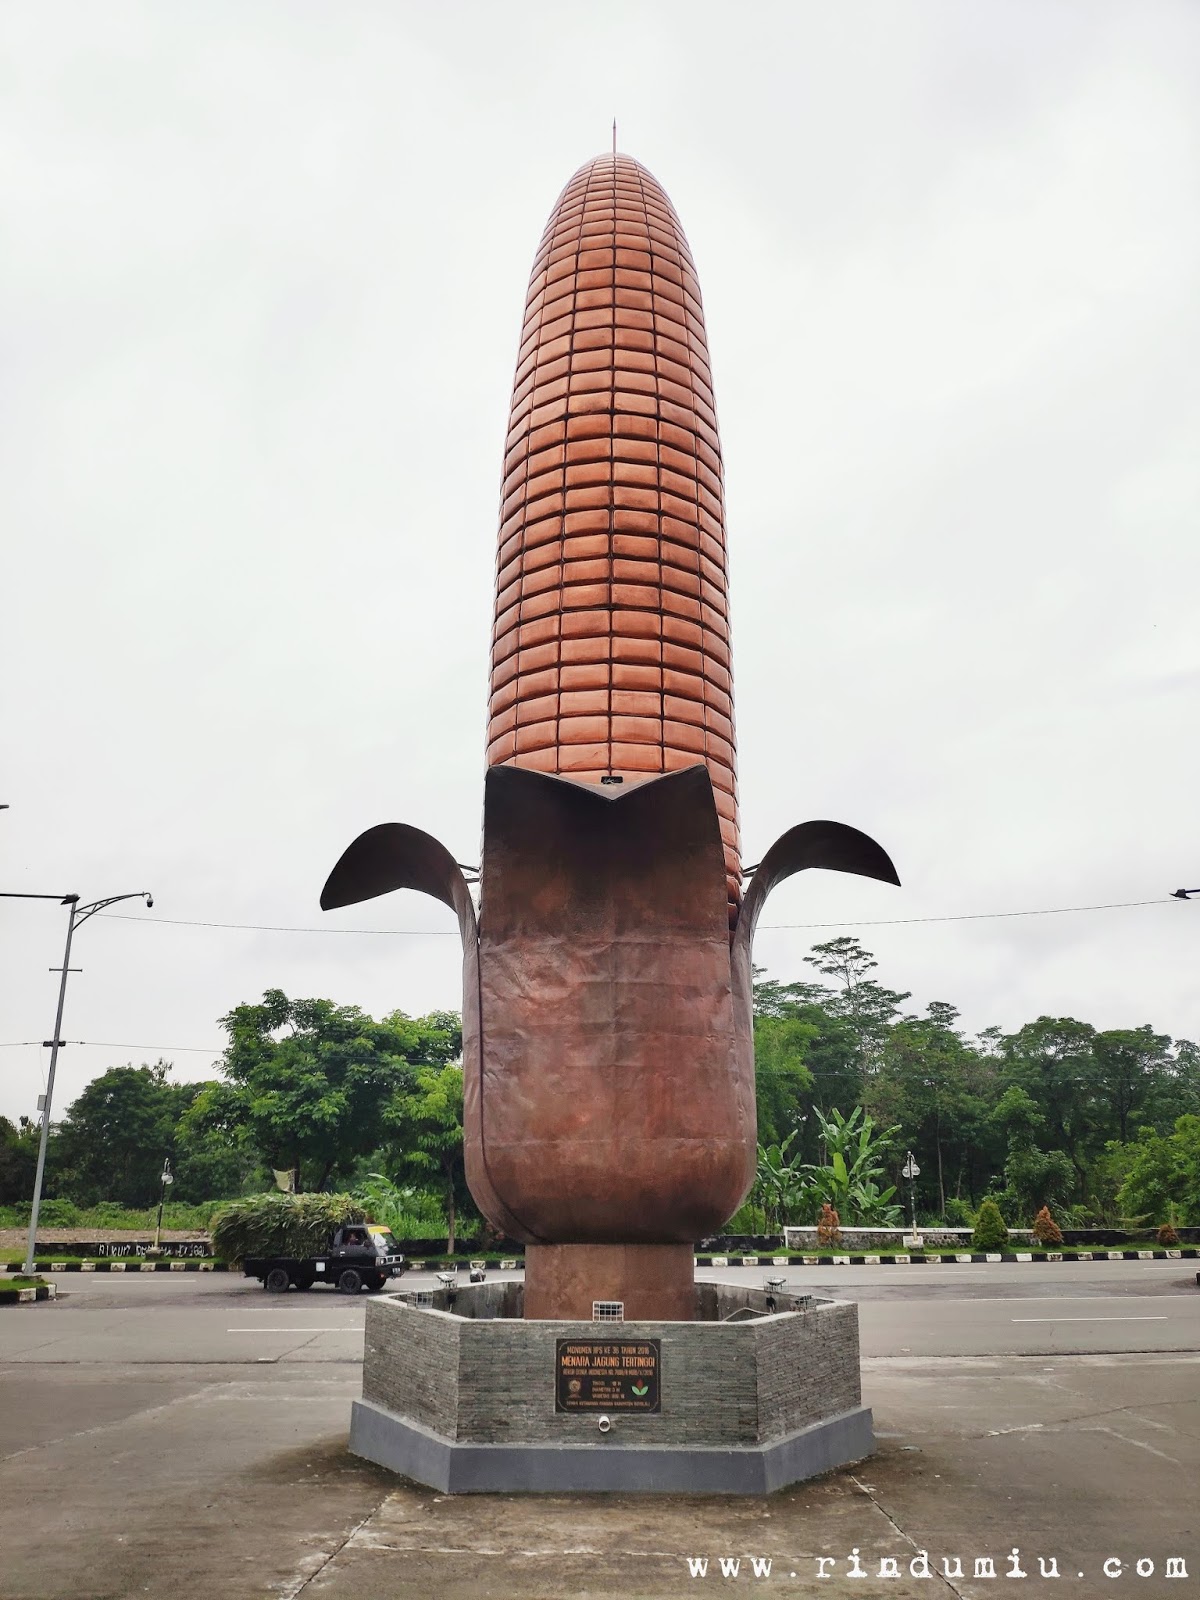 Tugu Jagung or Corn Tower in one of T junction in Boyolali in the northeast of Jogja